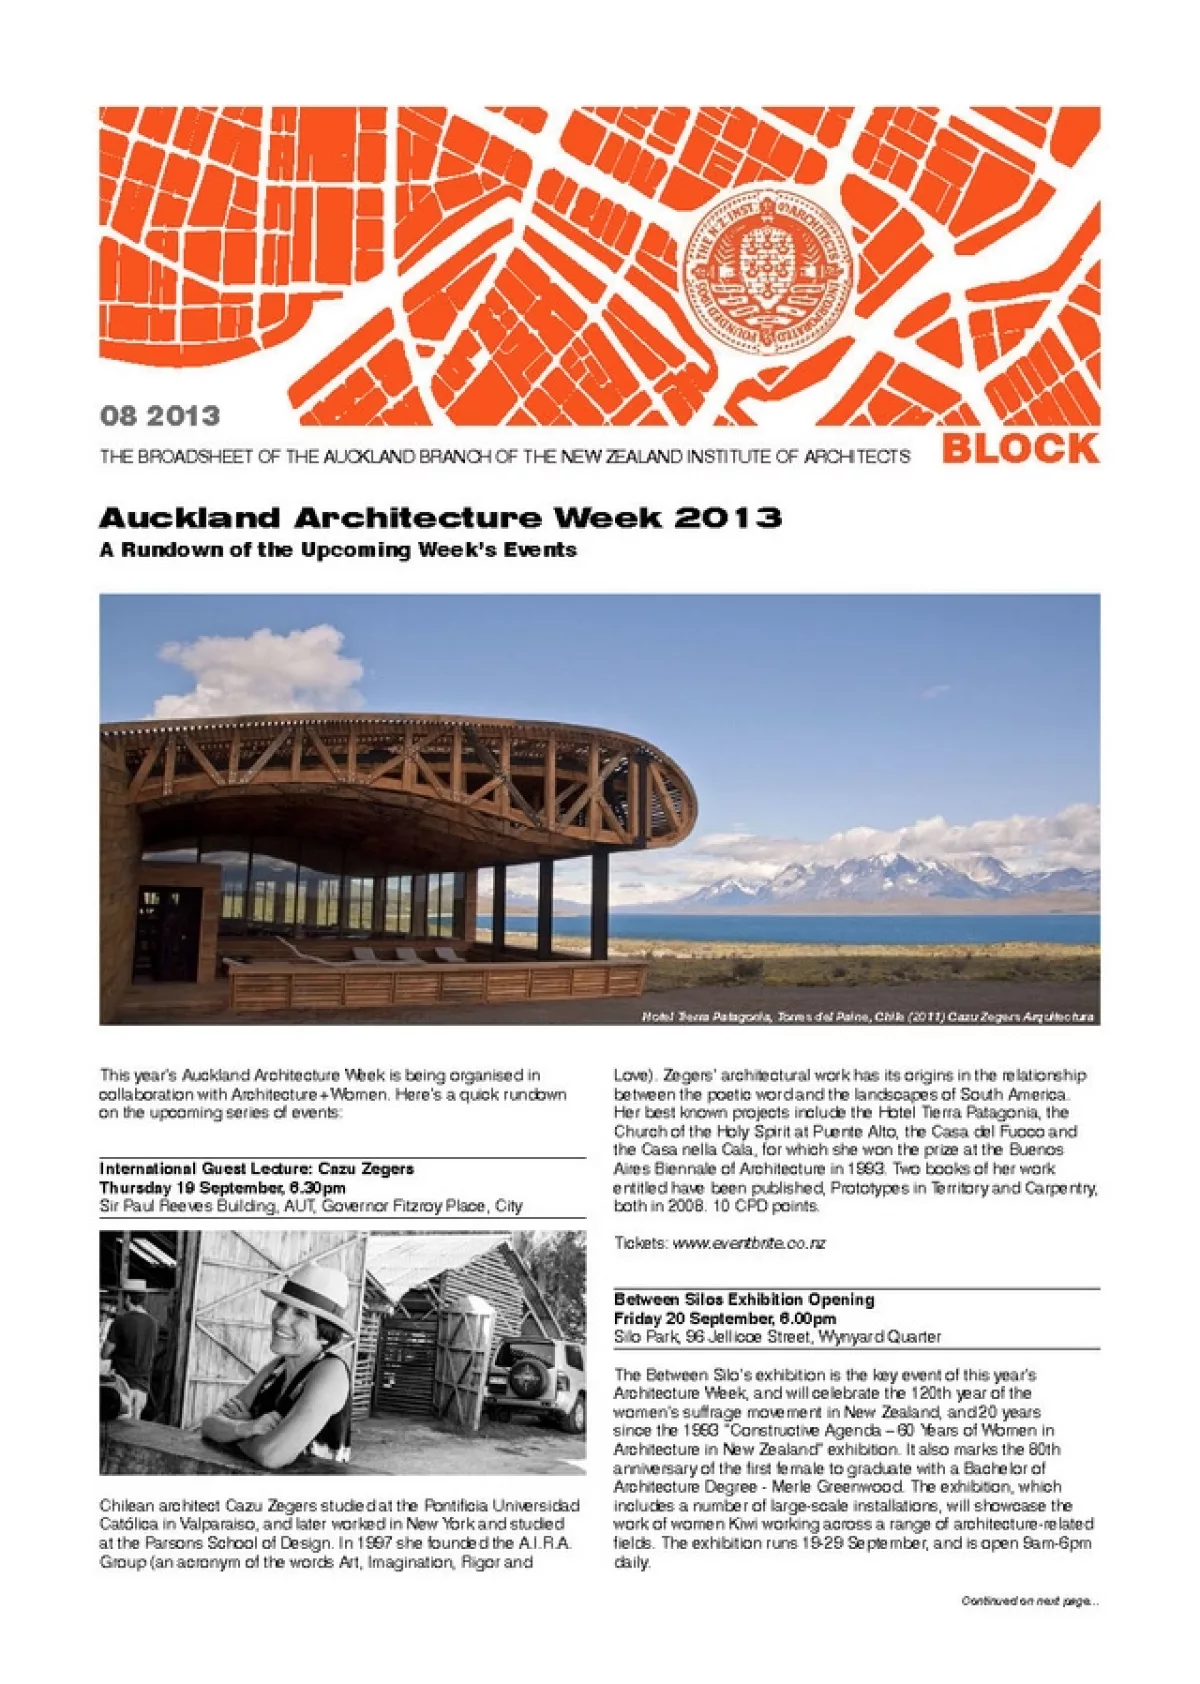 AW 2013 08 Block Digital AAW cover